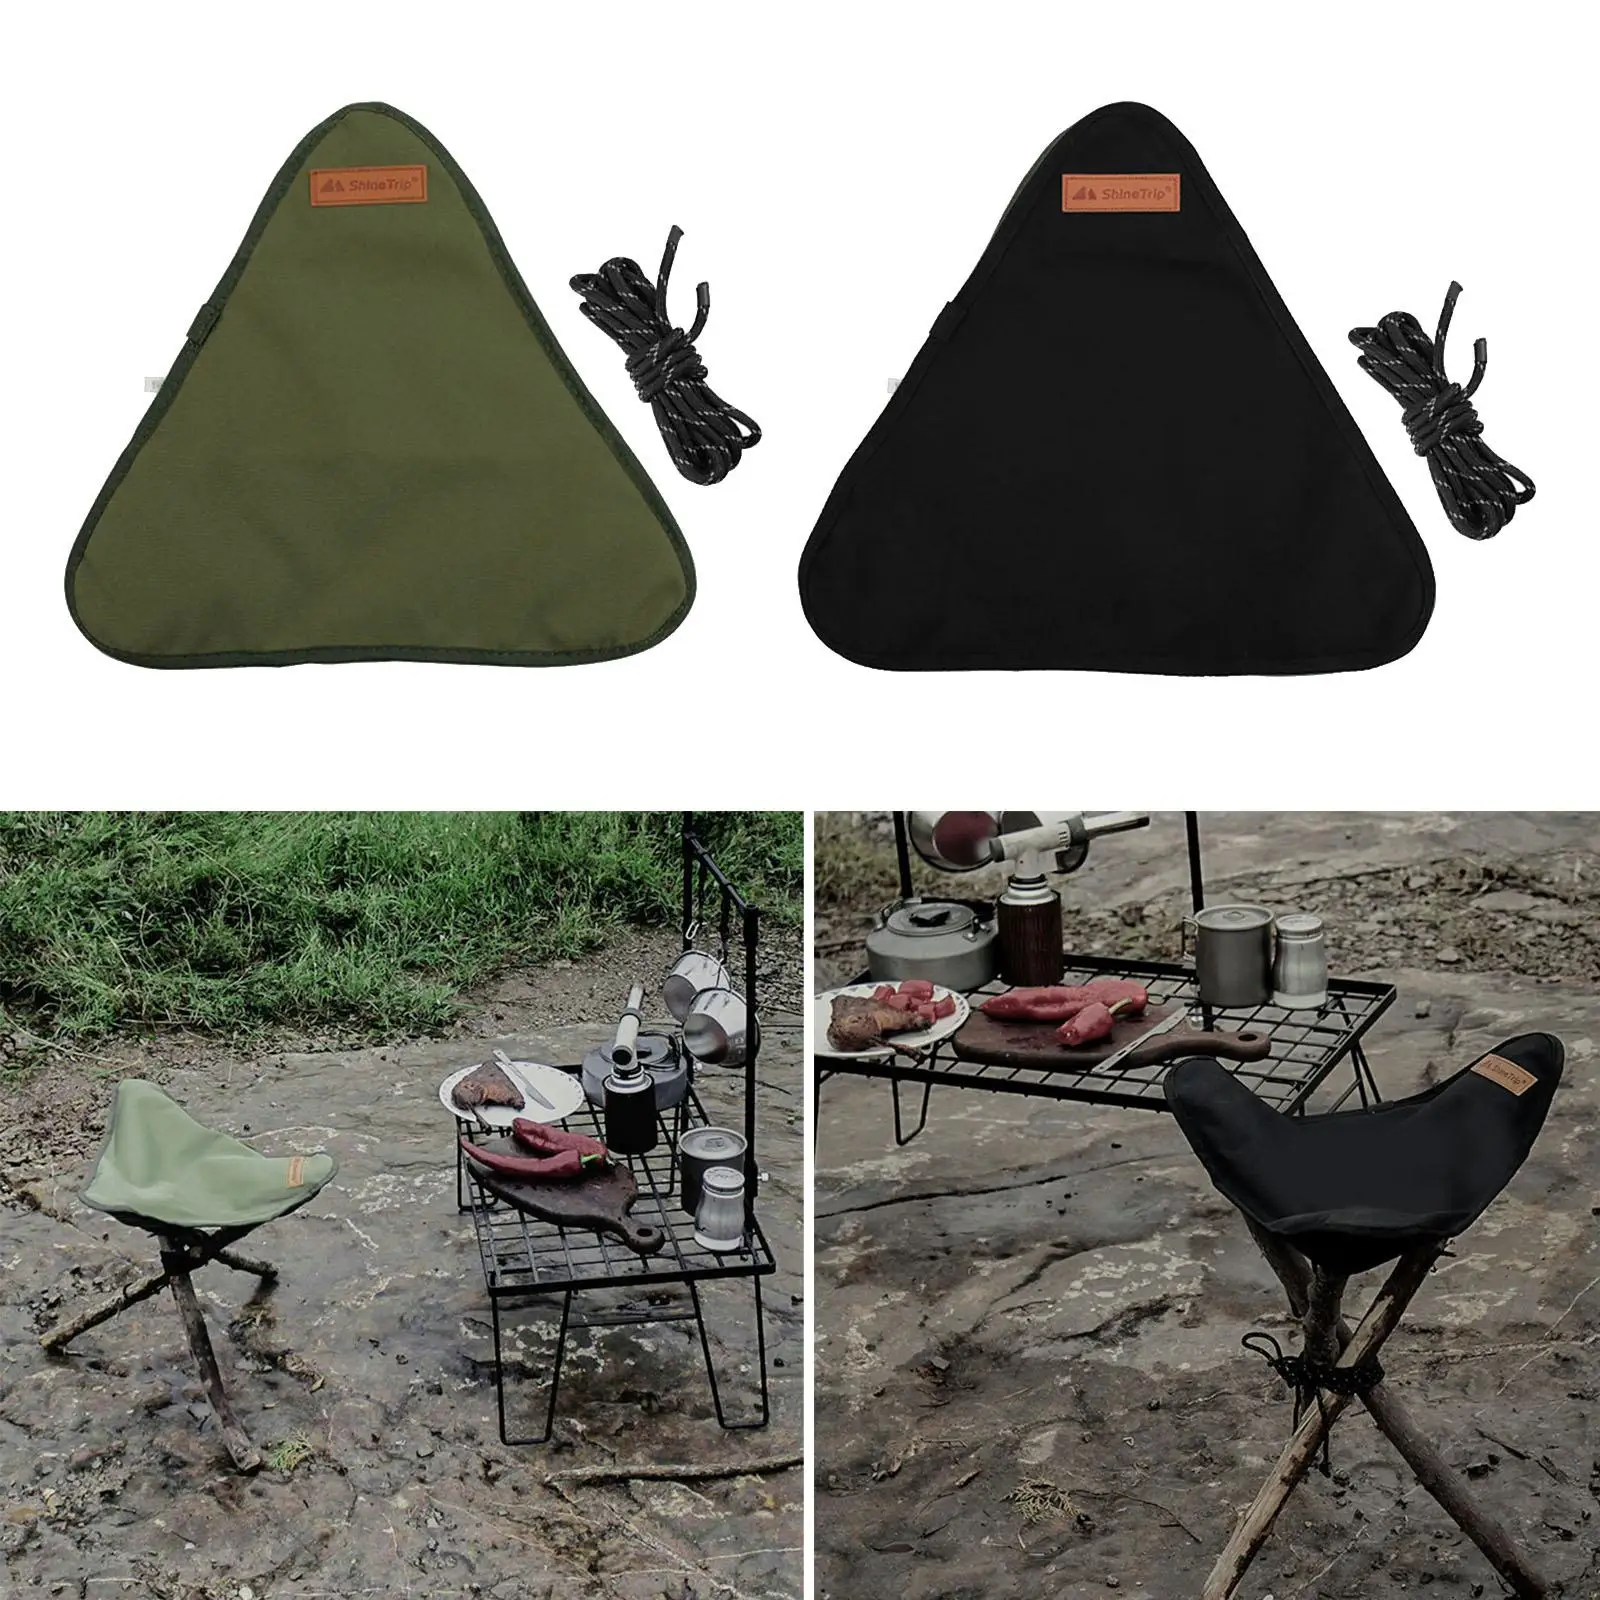 Folding Tripod Stool Cloth Lightweight Waterproof 3 Legs Chair Portable Seat Cover for Outdoor Camping Fishing BBQ Hiking